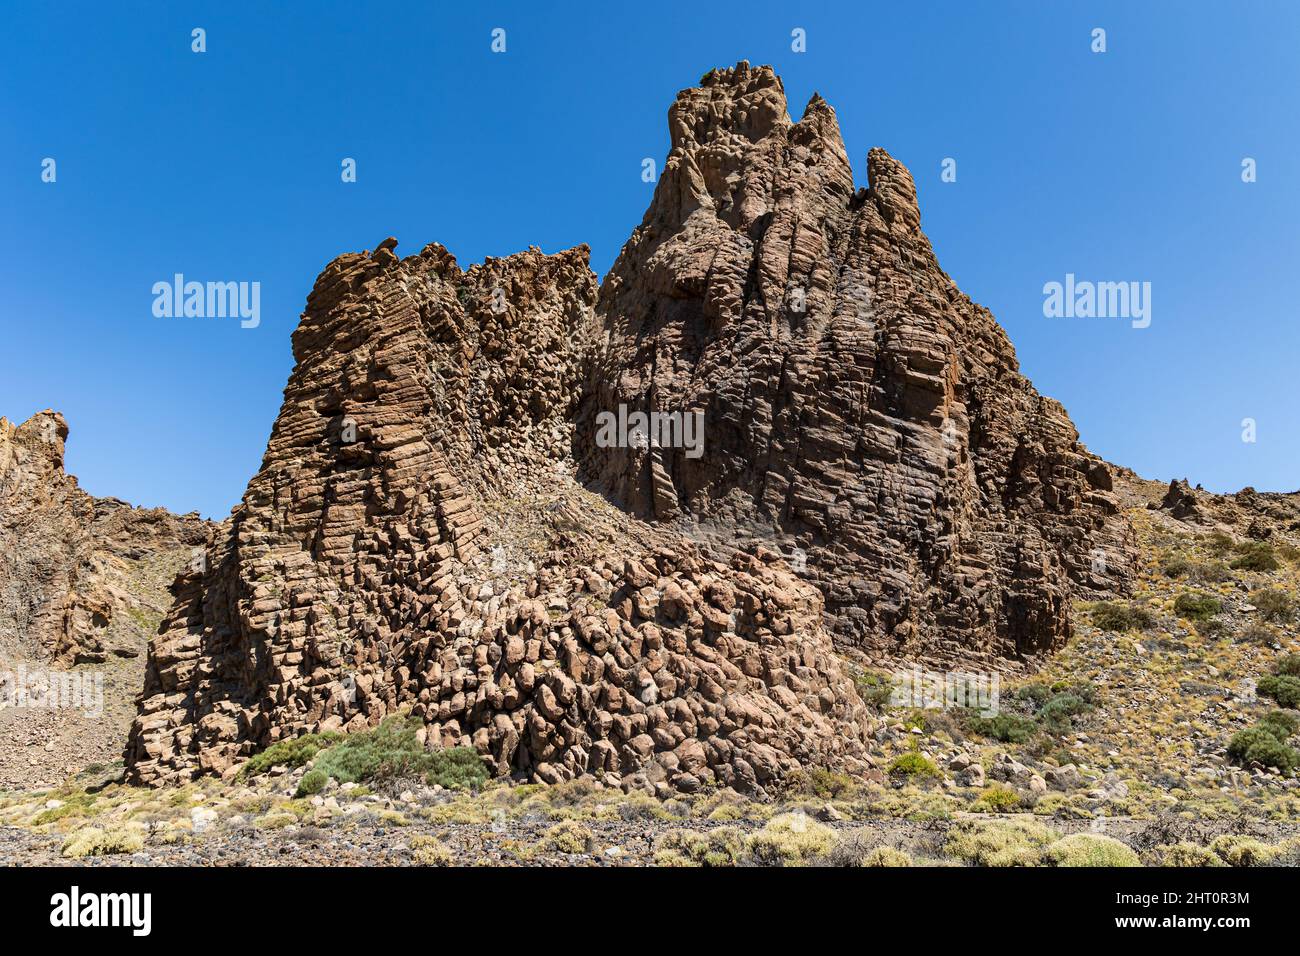 La Catedral rock formation with basalt column structure, Teide National Park, Tenerife, Spain Stock Photo